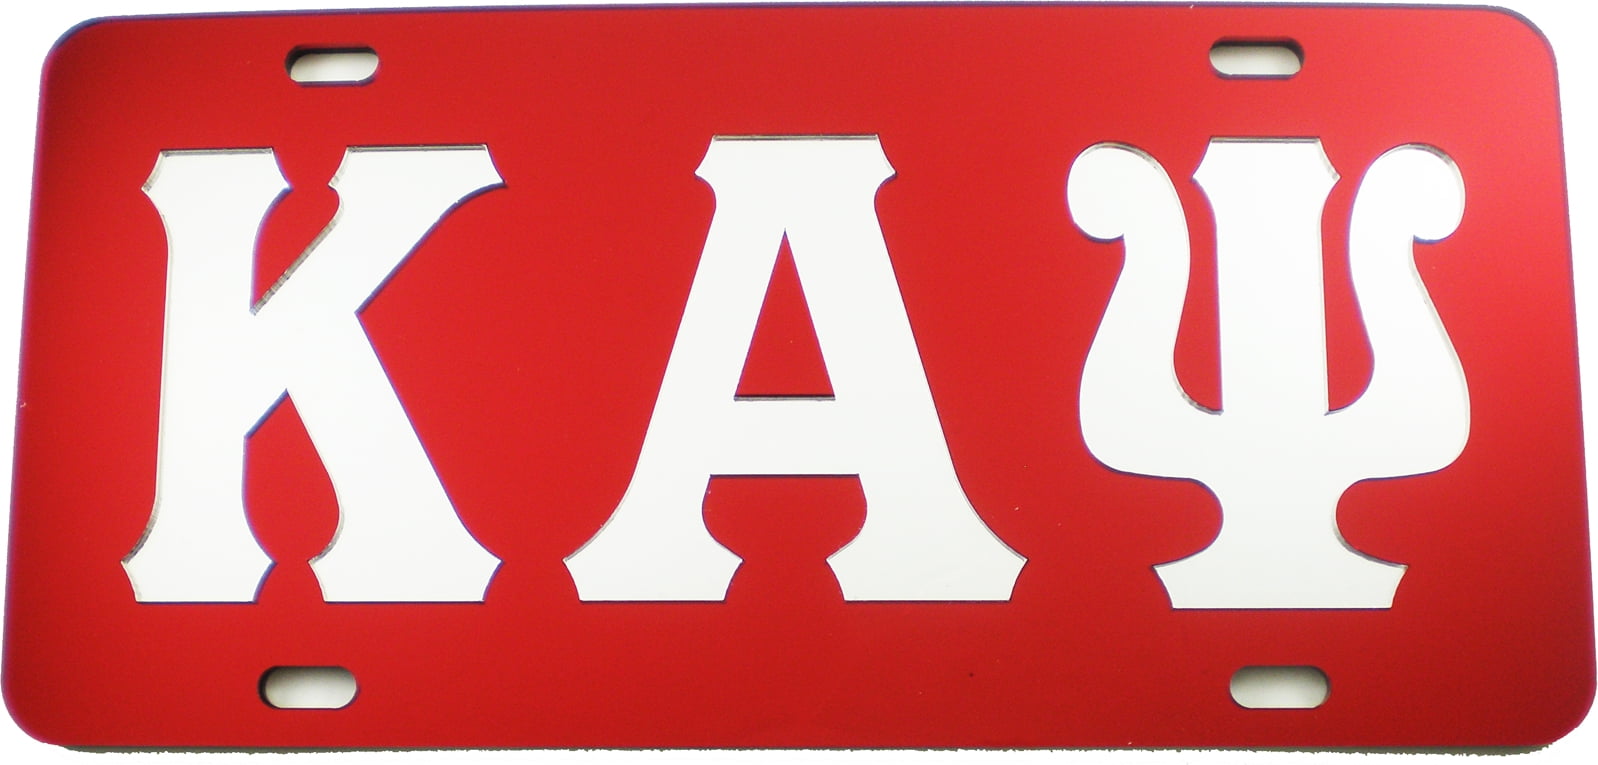 Kappa Alpha Psi Red Outlined Mirror License Plate 